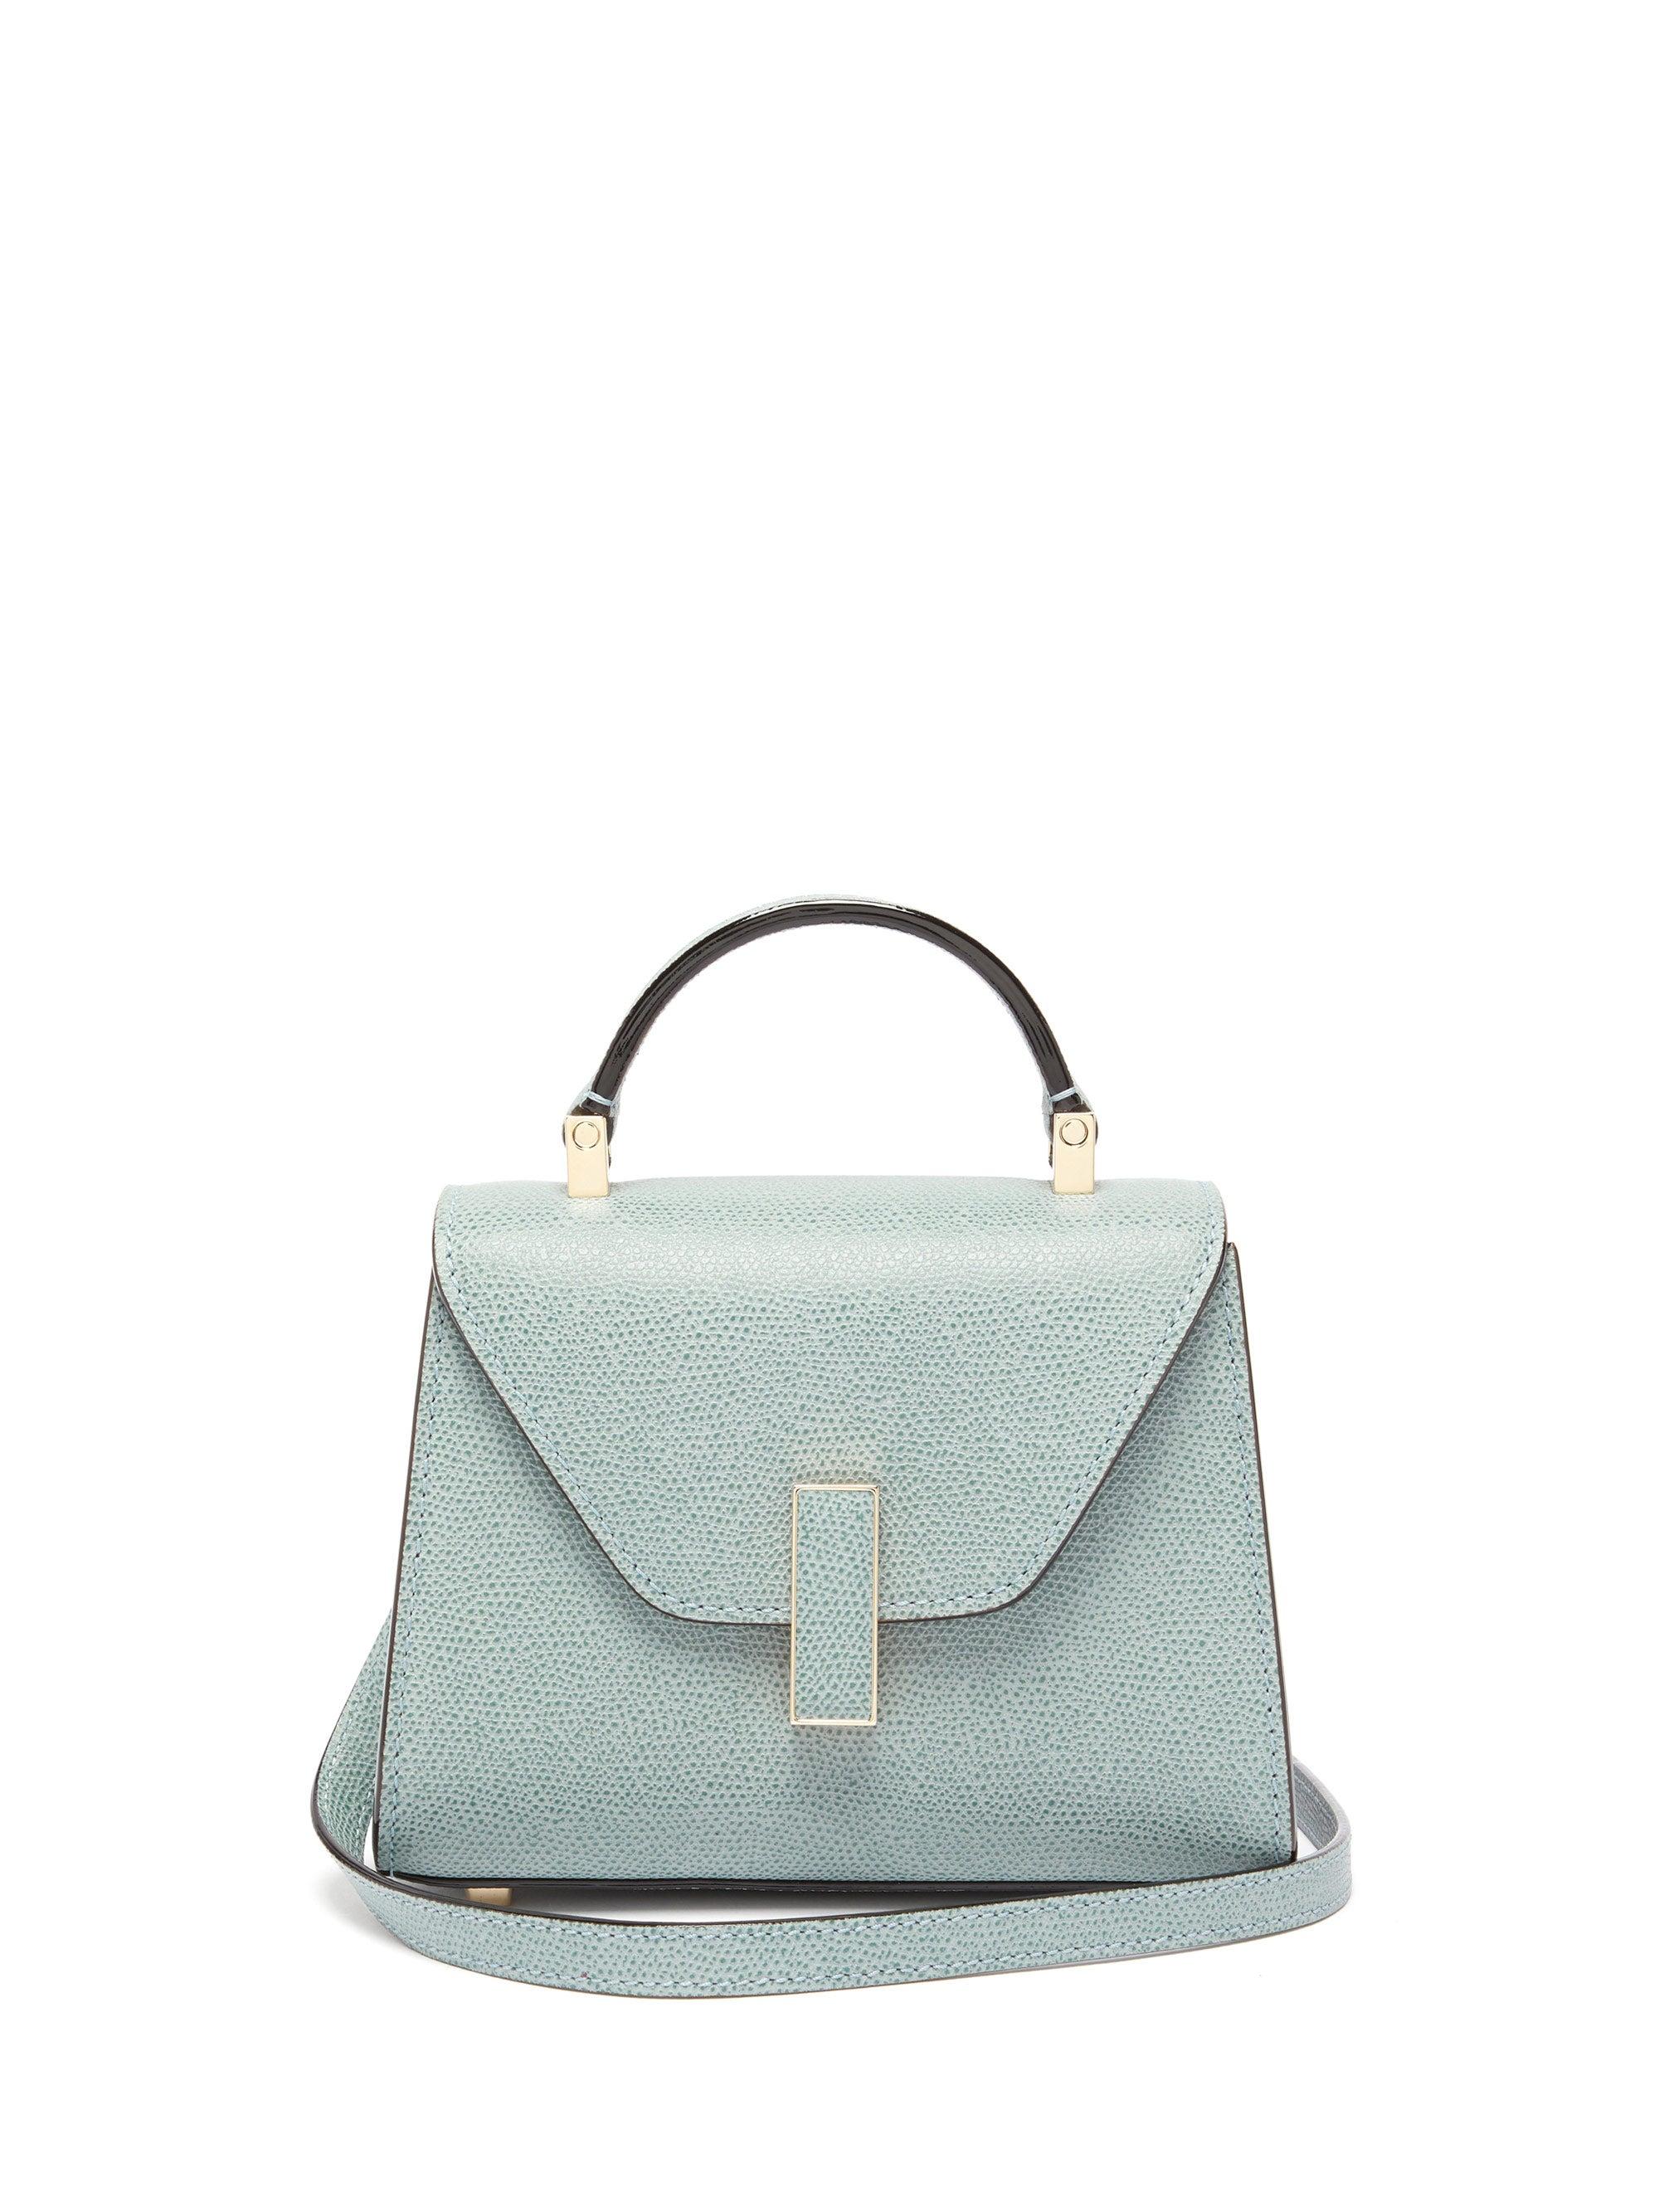 Valextra Iside Micro Grained Leather Bag in Light Blue (Blue) - Lyst